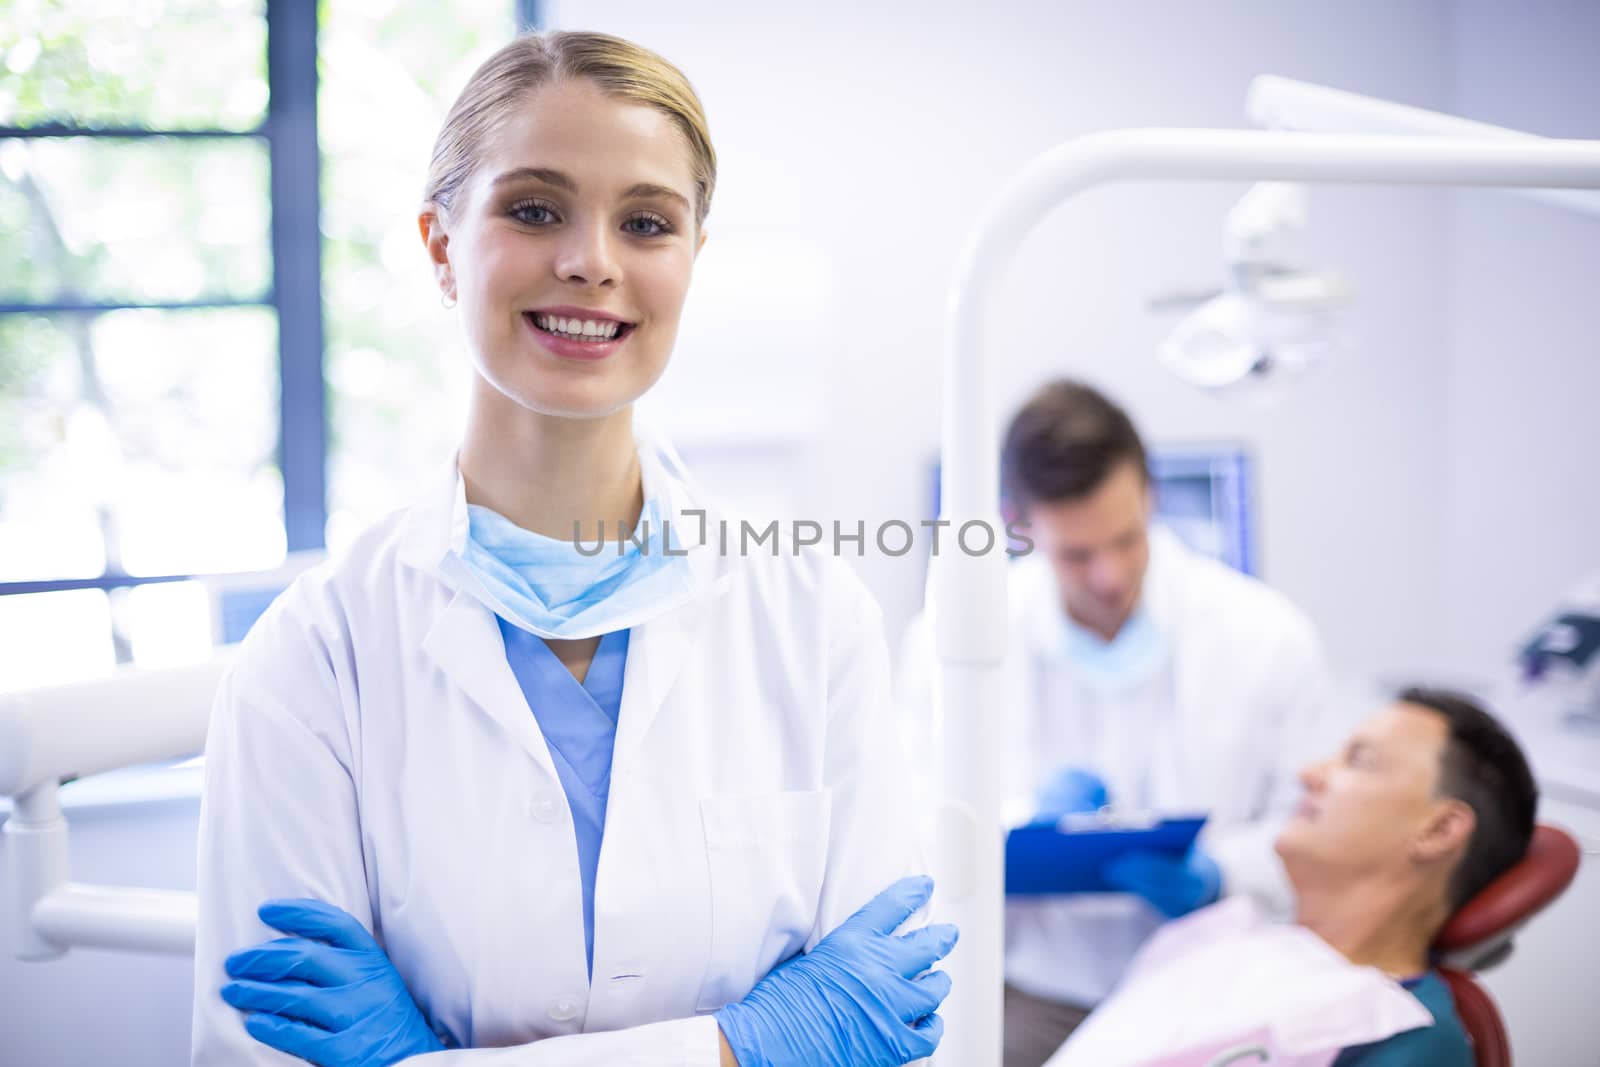 Portrait of smiling dentist standing  with arms crossed while her colleague examining patient in background